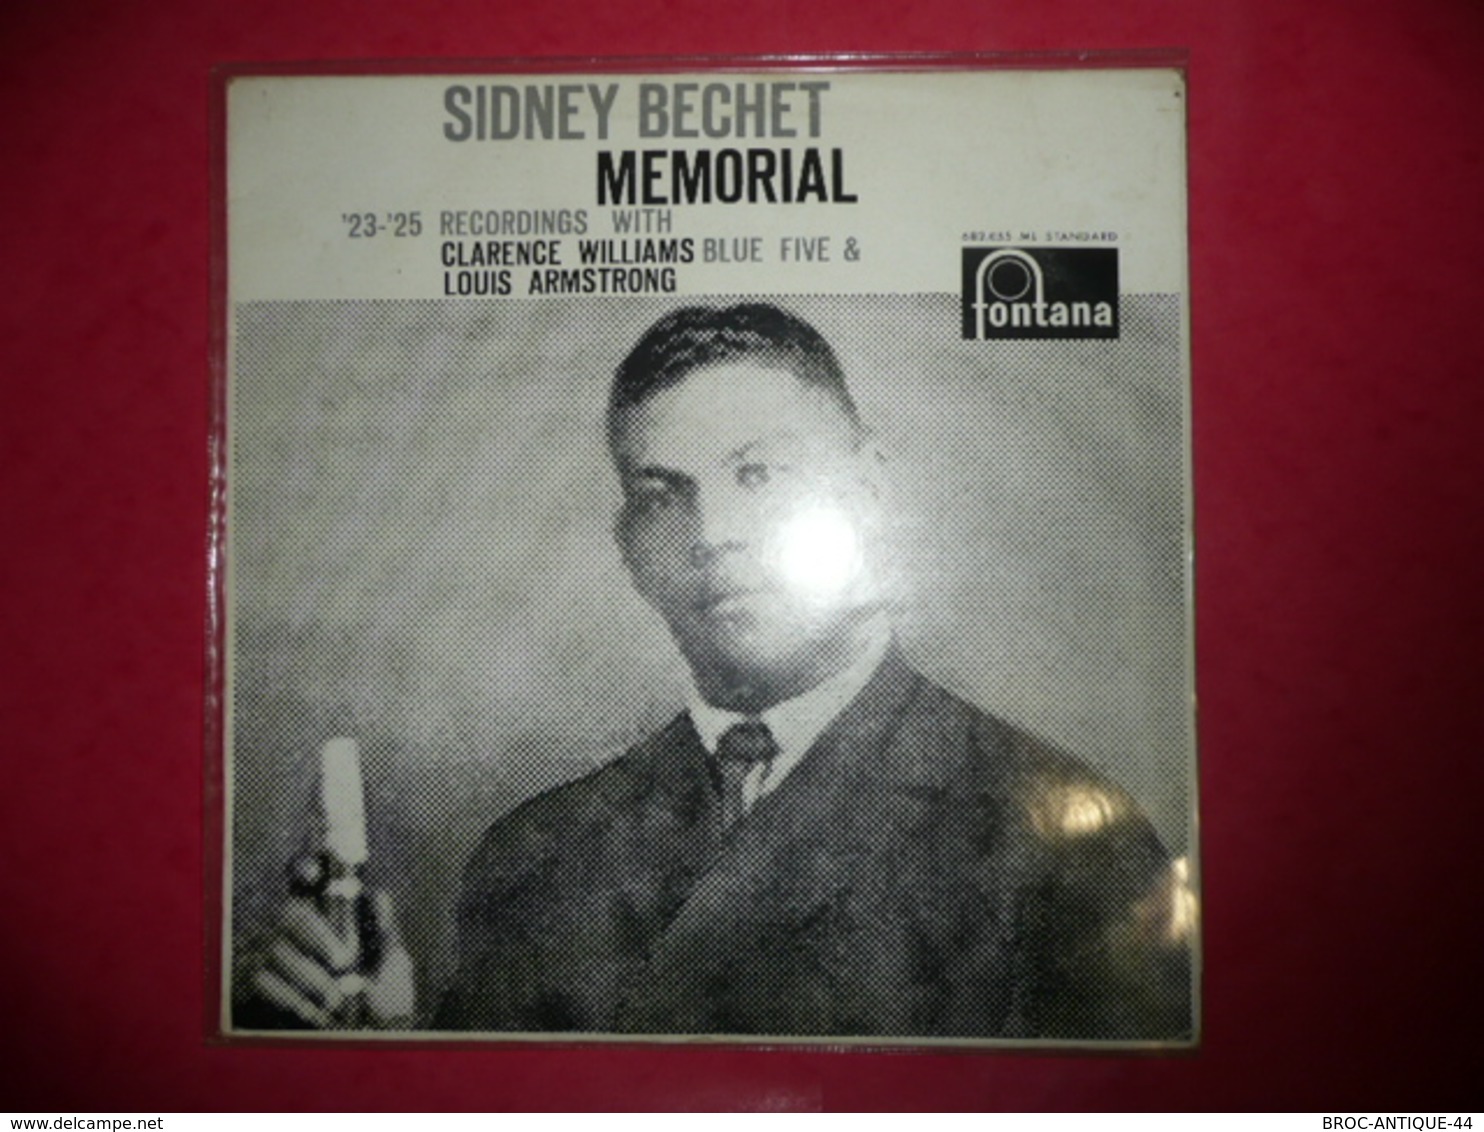 LP33 N°651 - SIDNEY BECHET MEMORIAL & C. WILLIAMS BLUE FIVE & L. ARMSTRONG - COMPILATION 2 TITRES - Jazz